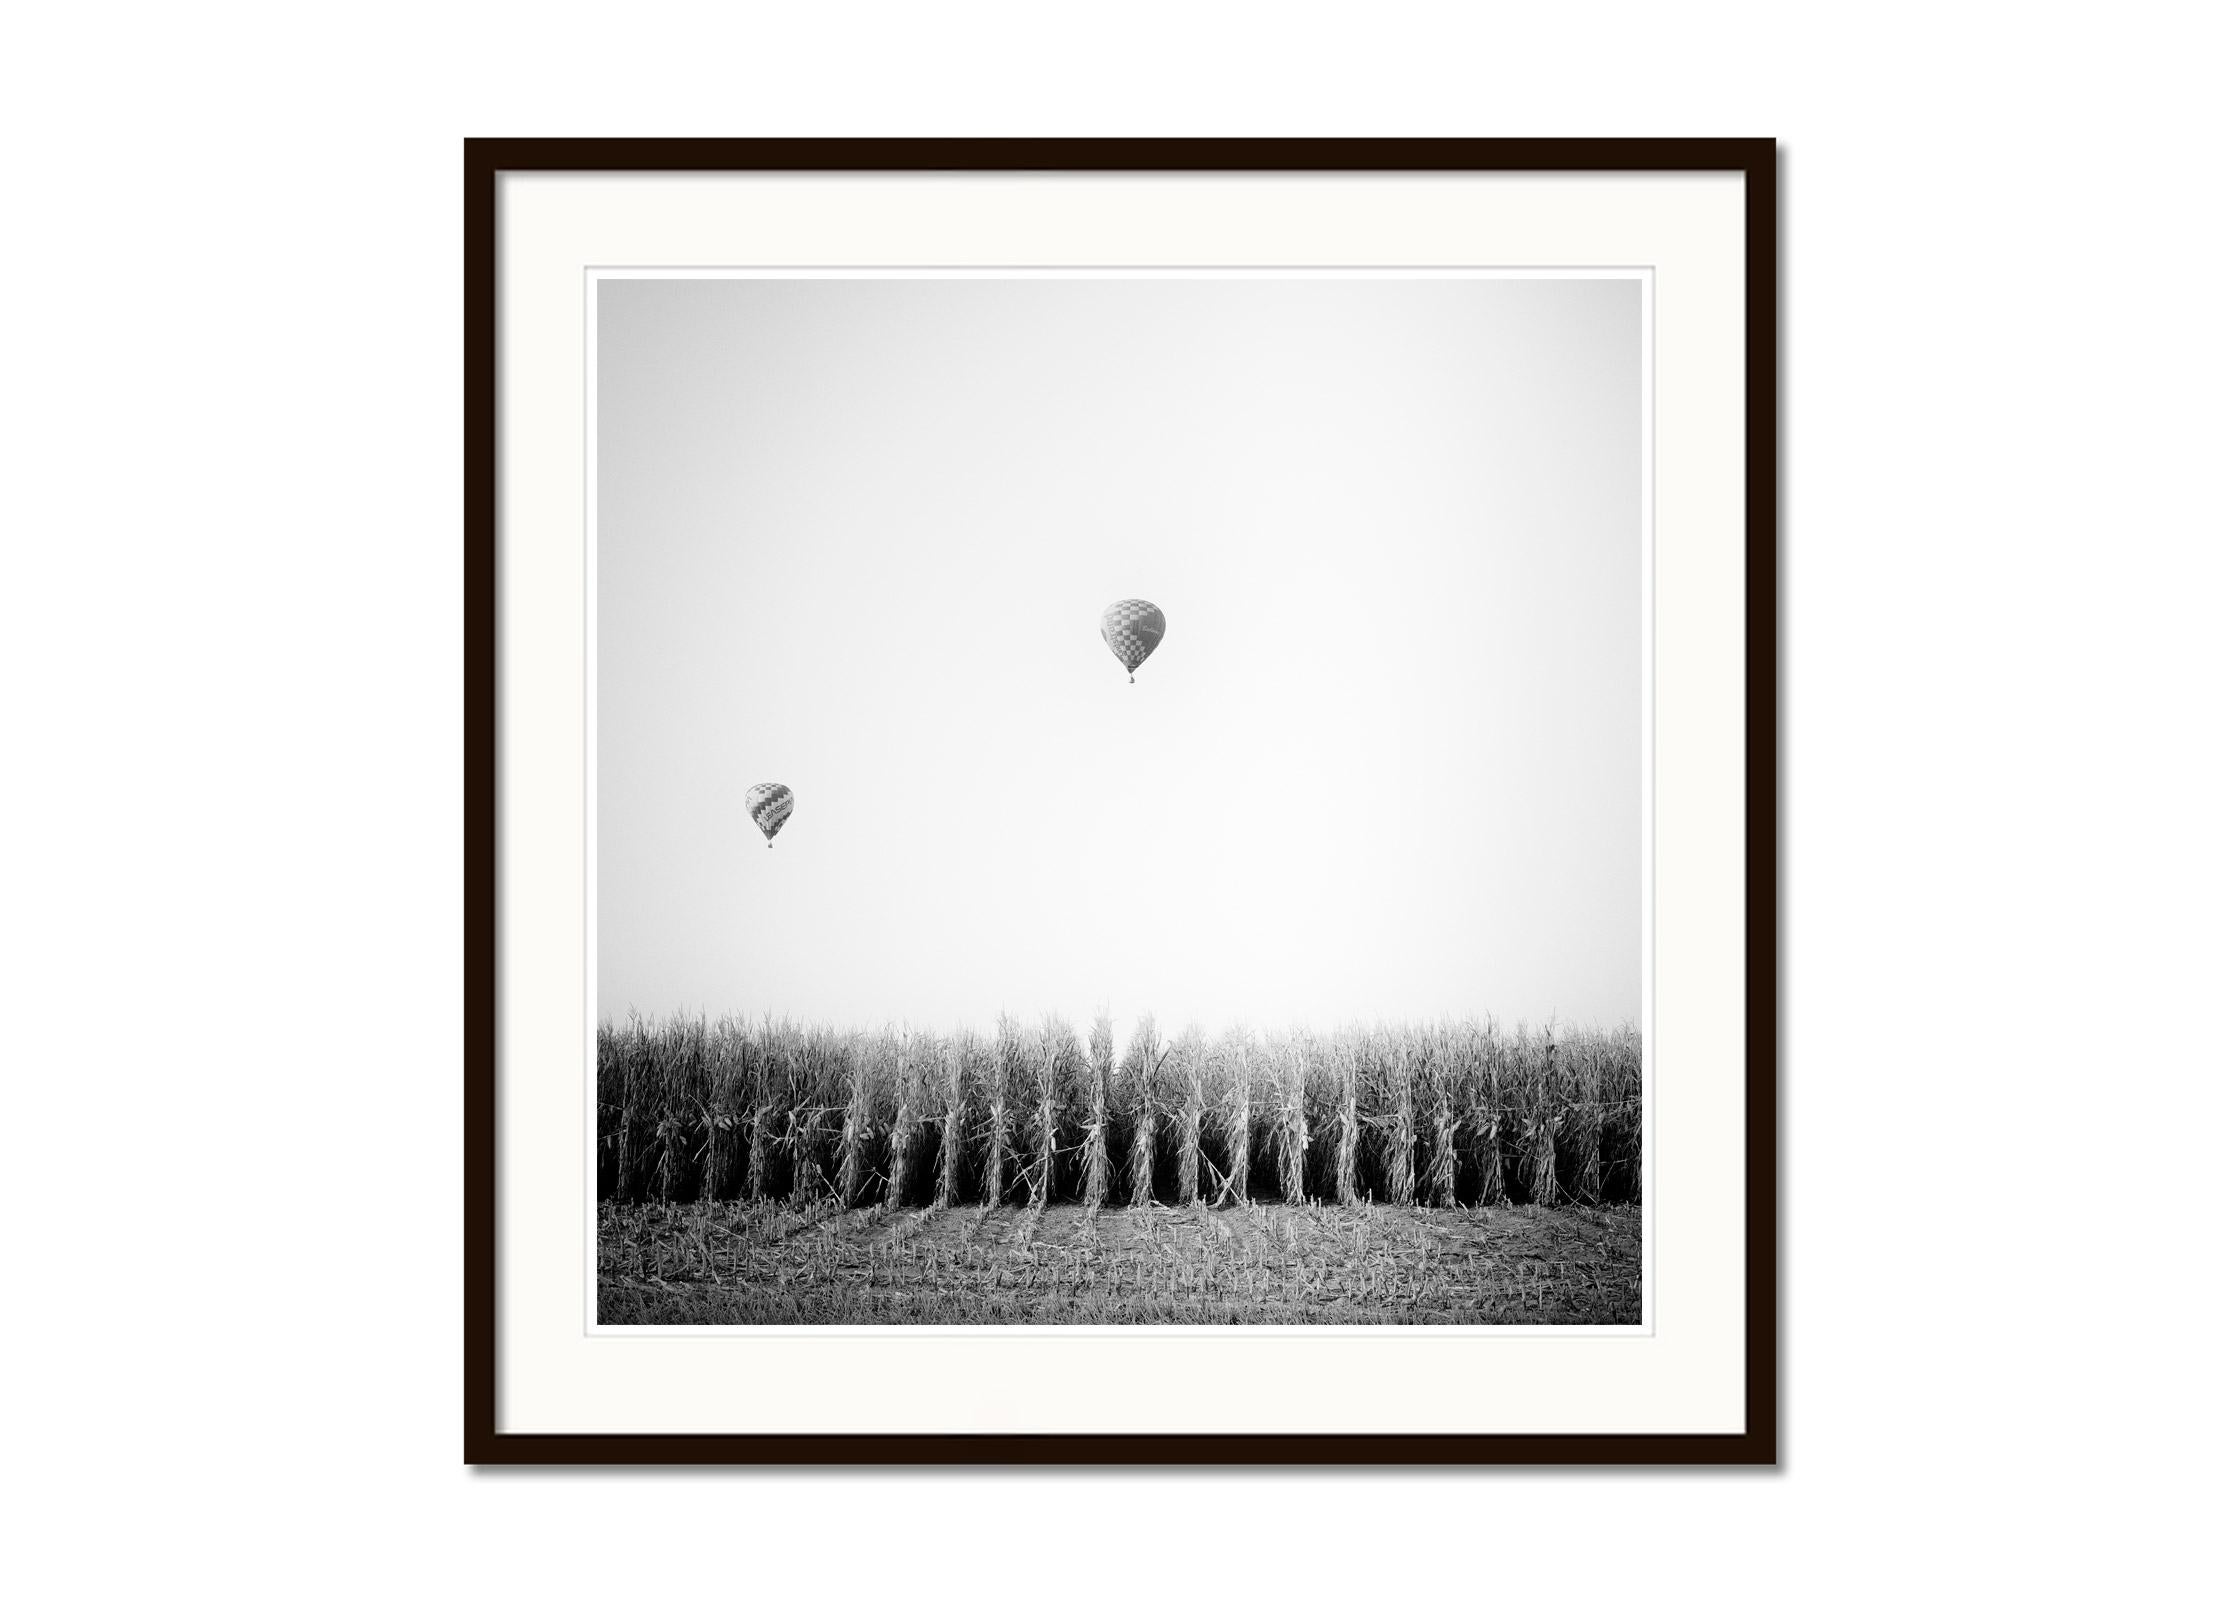 Hot Air Balloon, Cornfield, Championship, black and white landscape photo print - Gray Black and White Photograph by Gerald Berghammer